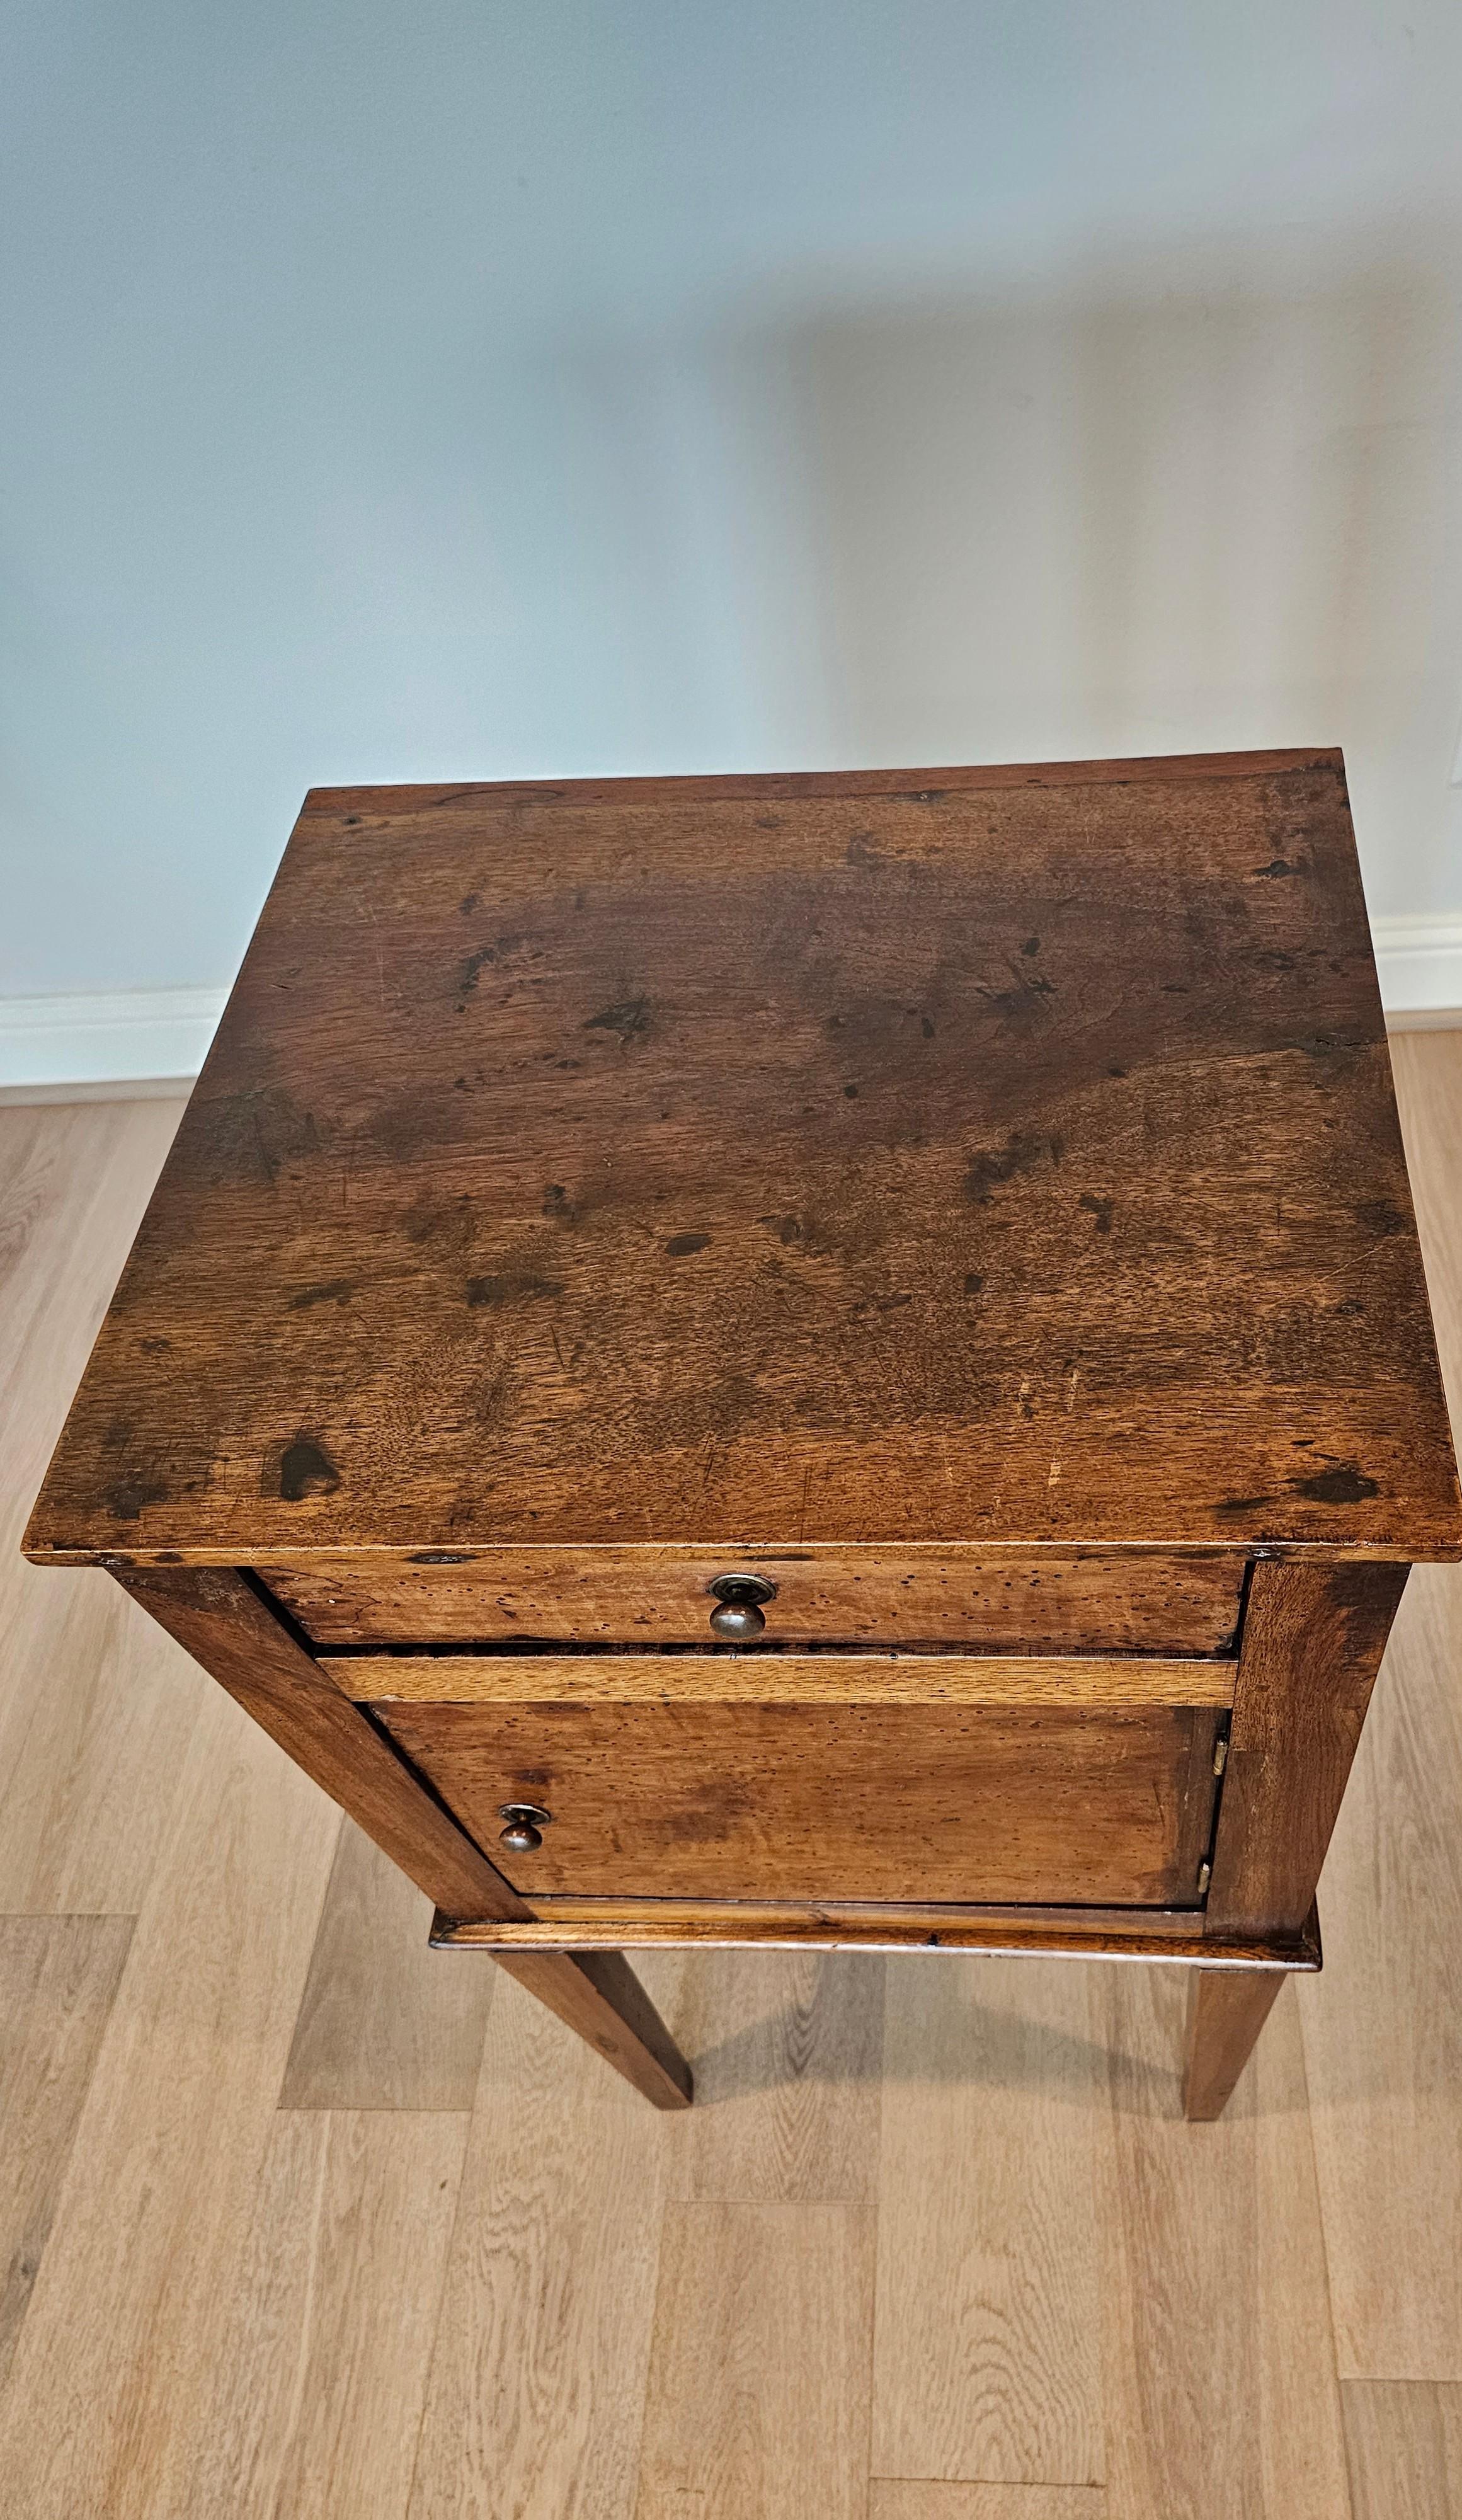 19th Century Italian Neoclassical Walnut Side Table Bedside Cabinet In Good Condition For Sale In Forney, TX